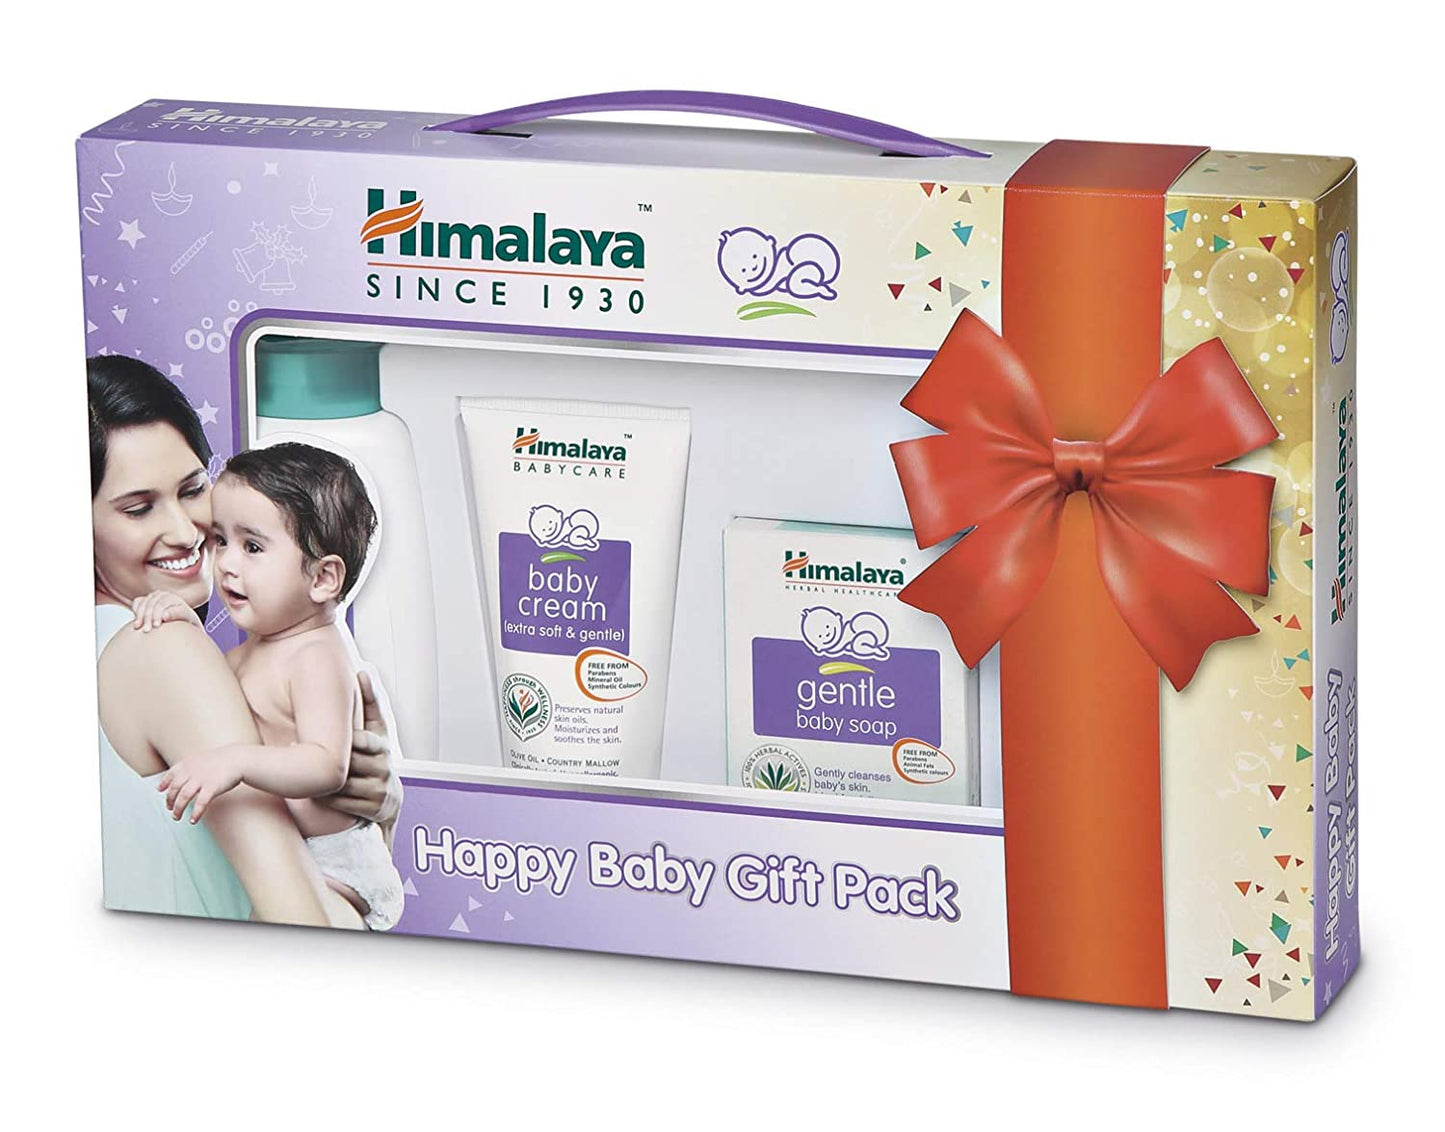 HAPPY BABY GIFT PACK 340RS 1 PCS